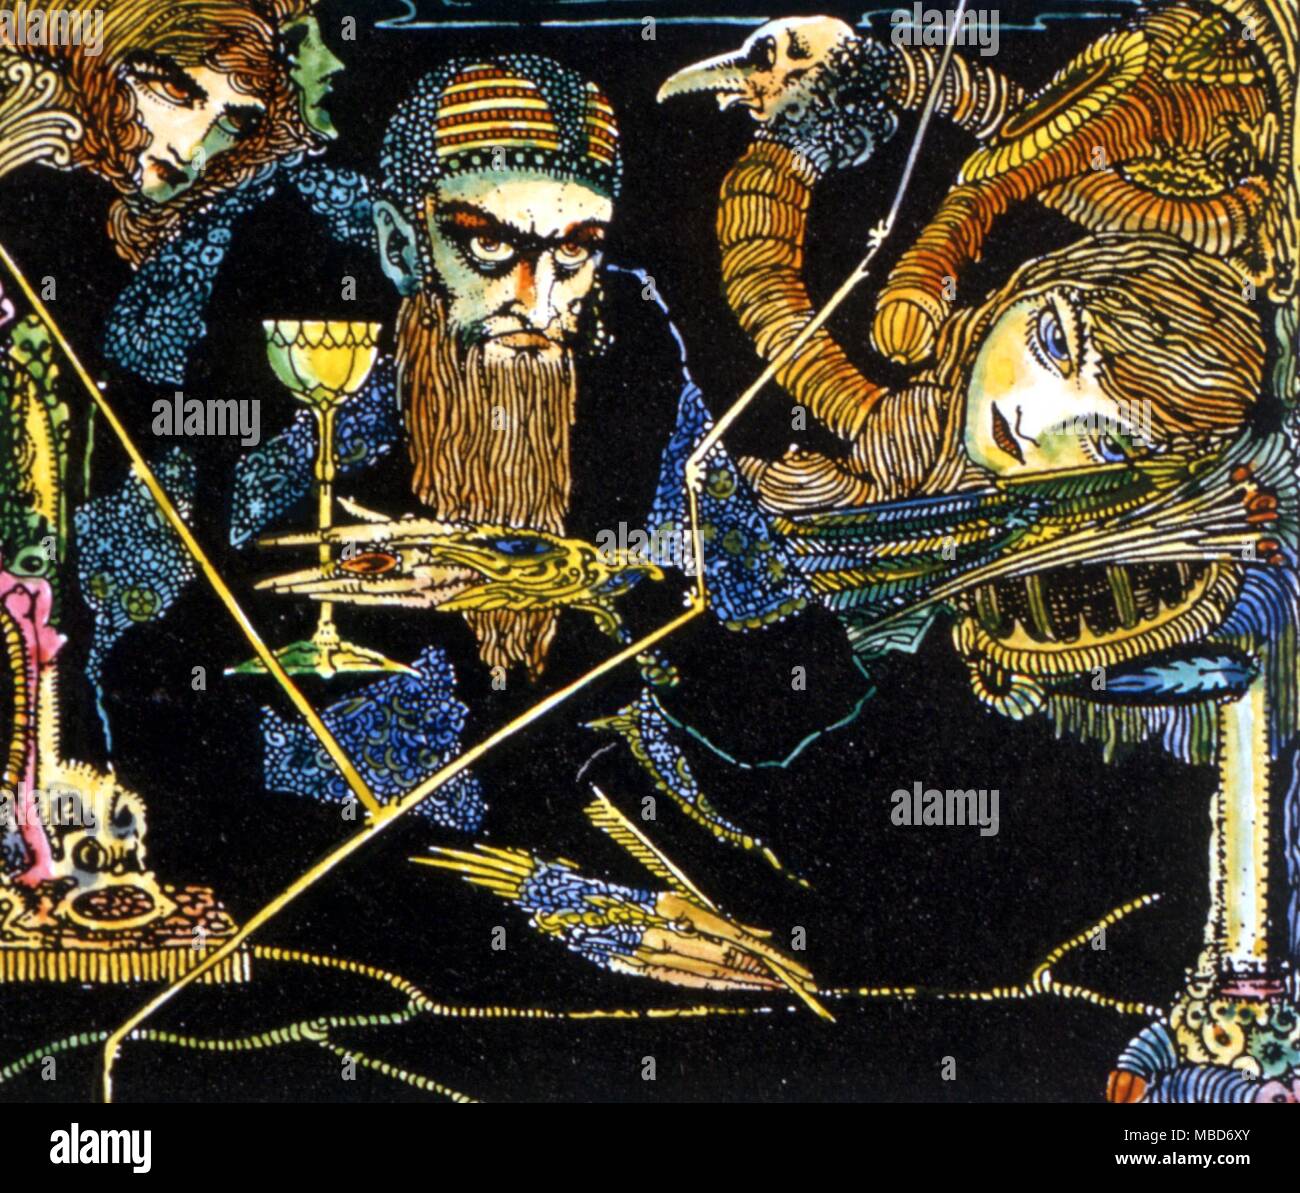 Faust surrounded by his phantasms. Illustration to Goethe's Faust by Harry Clarke - 1925 ed Stock Photo